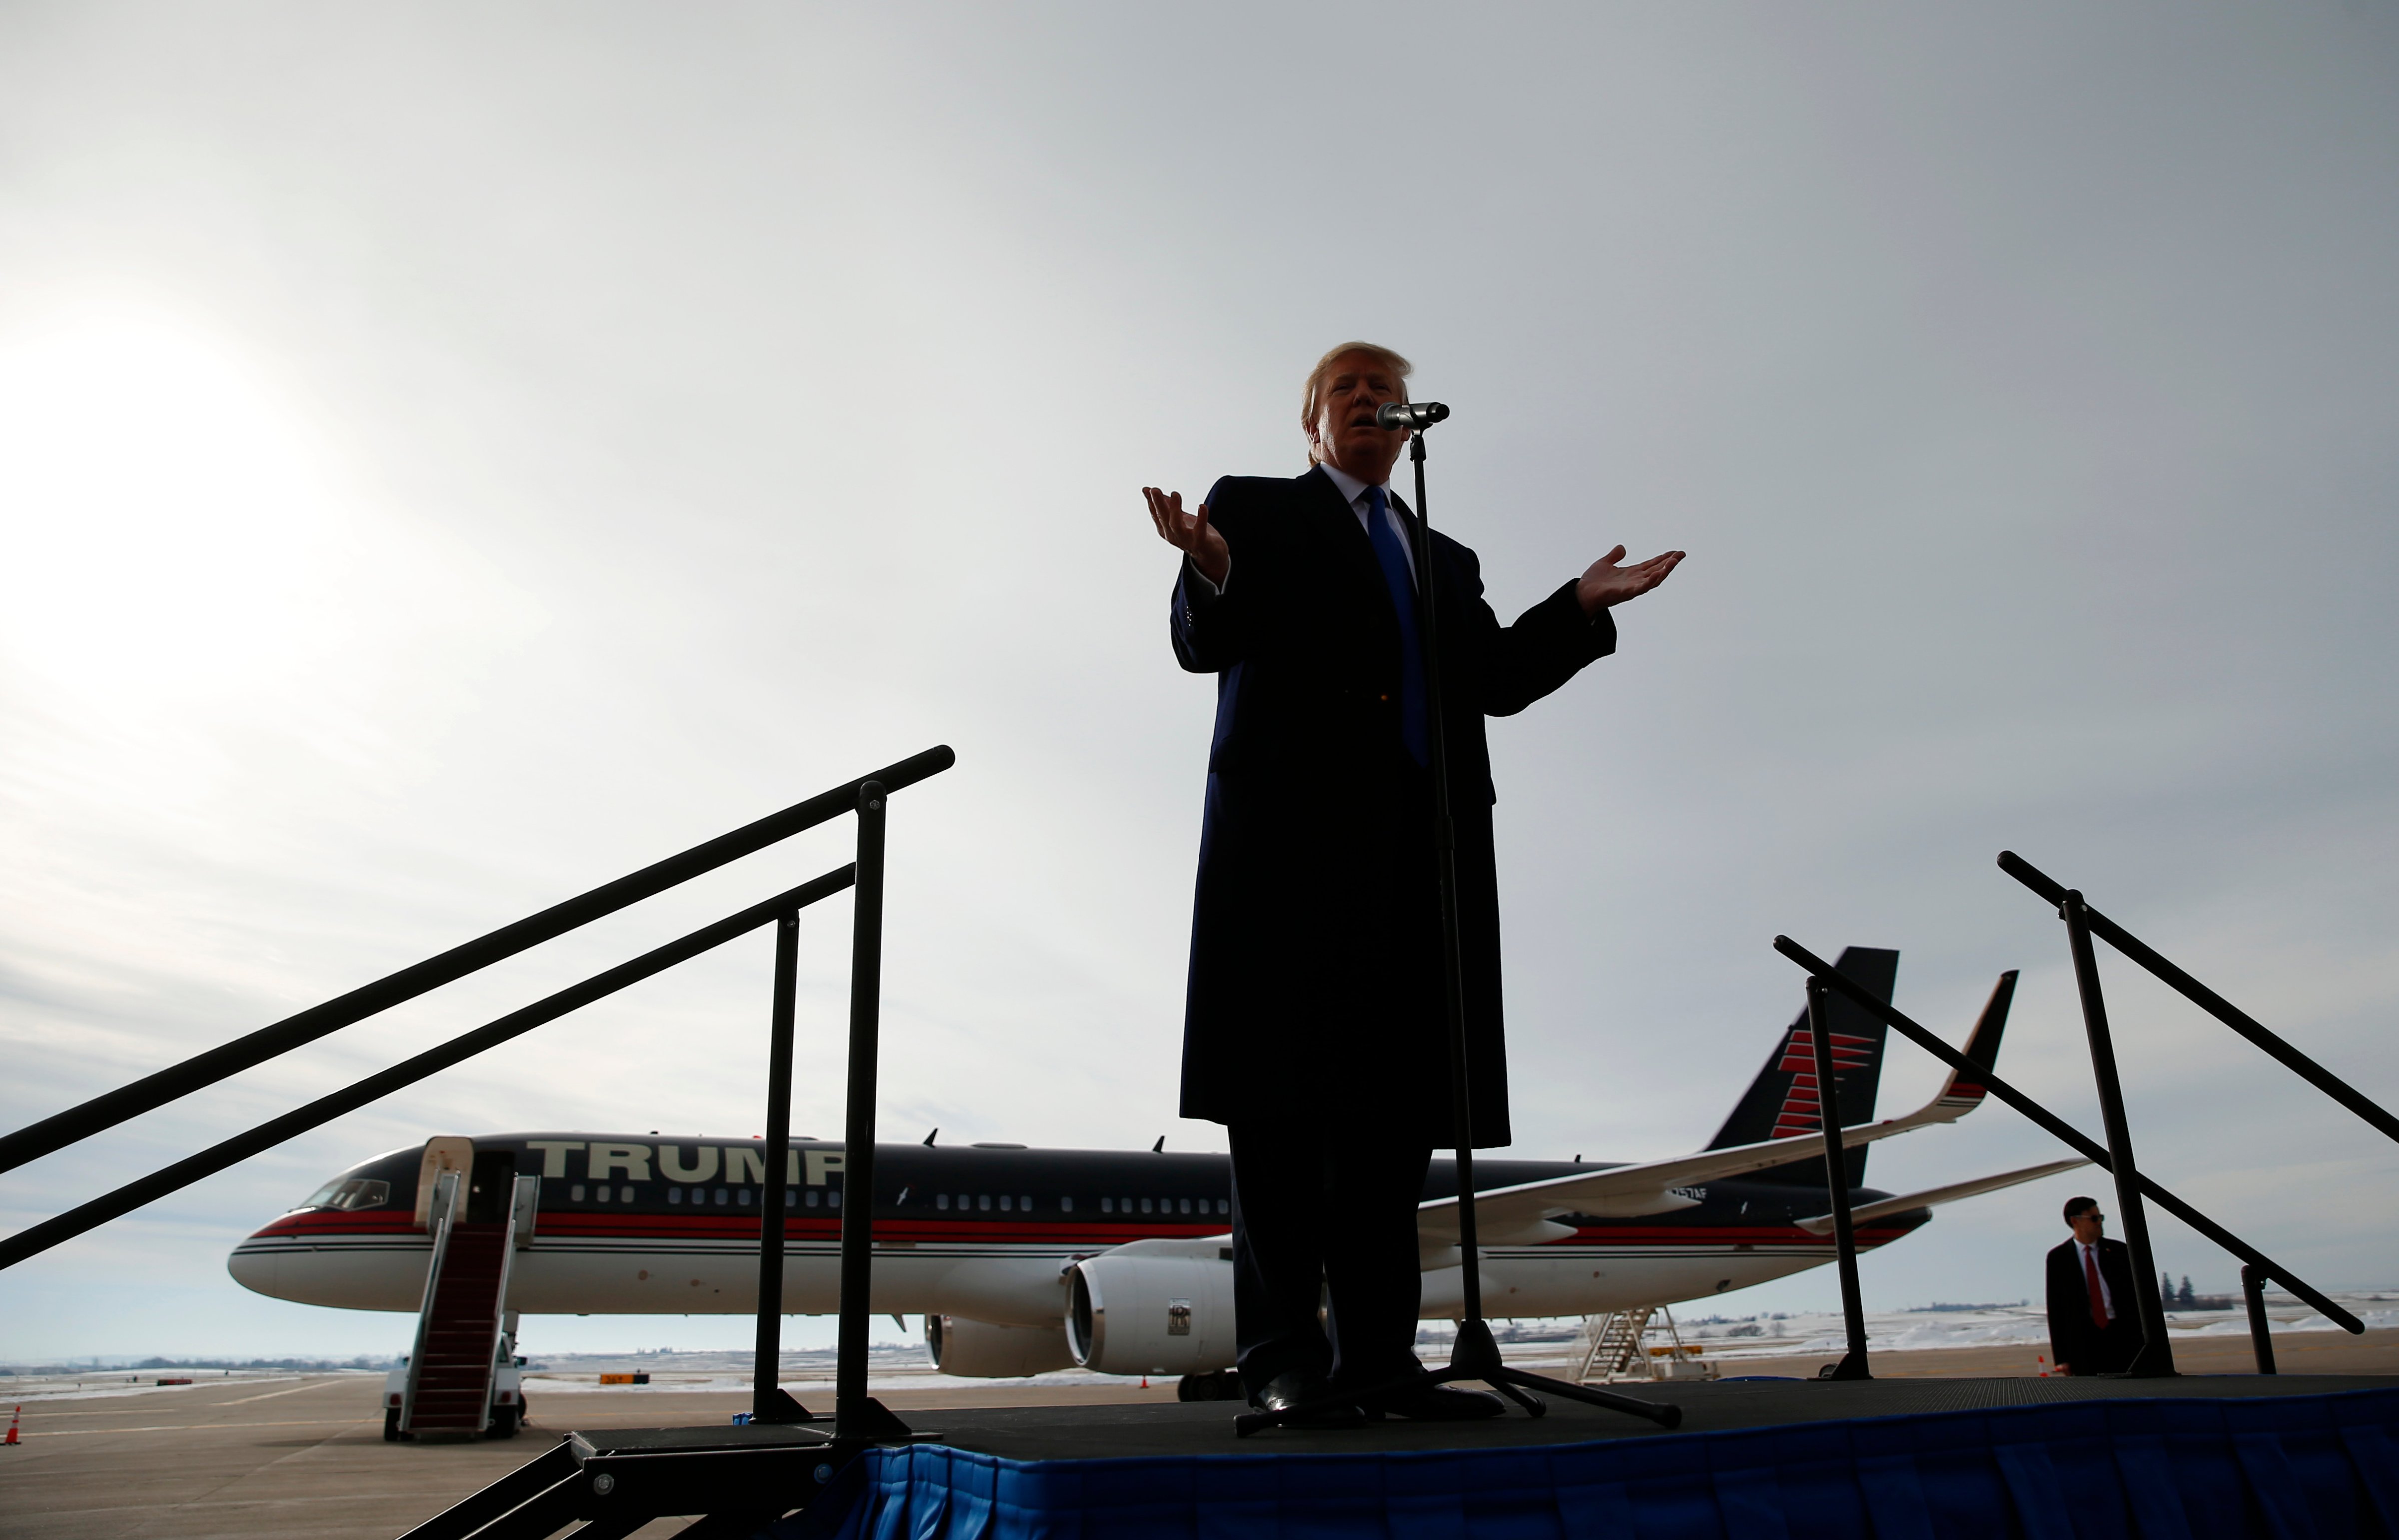 Donald Trump speaks during a campaign event in Dubuque, IA on Jan. 30, 2016. (Paul Sancya—AP)